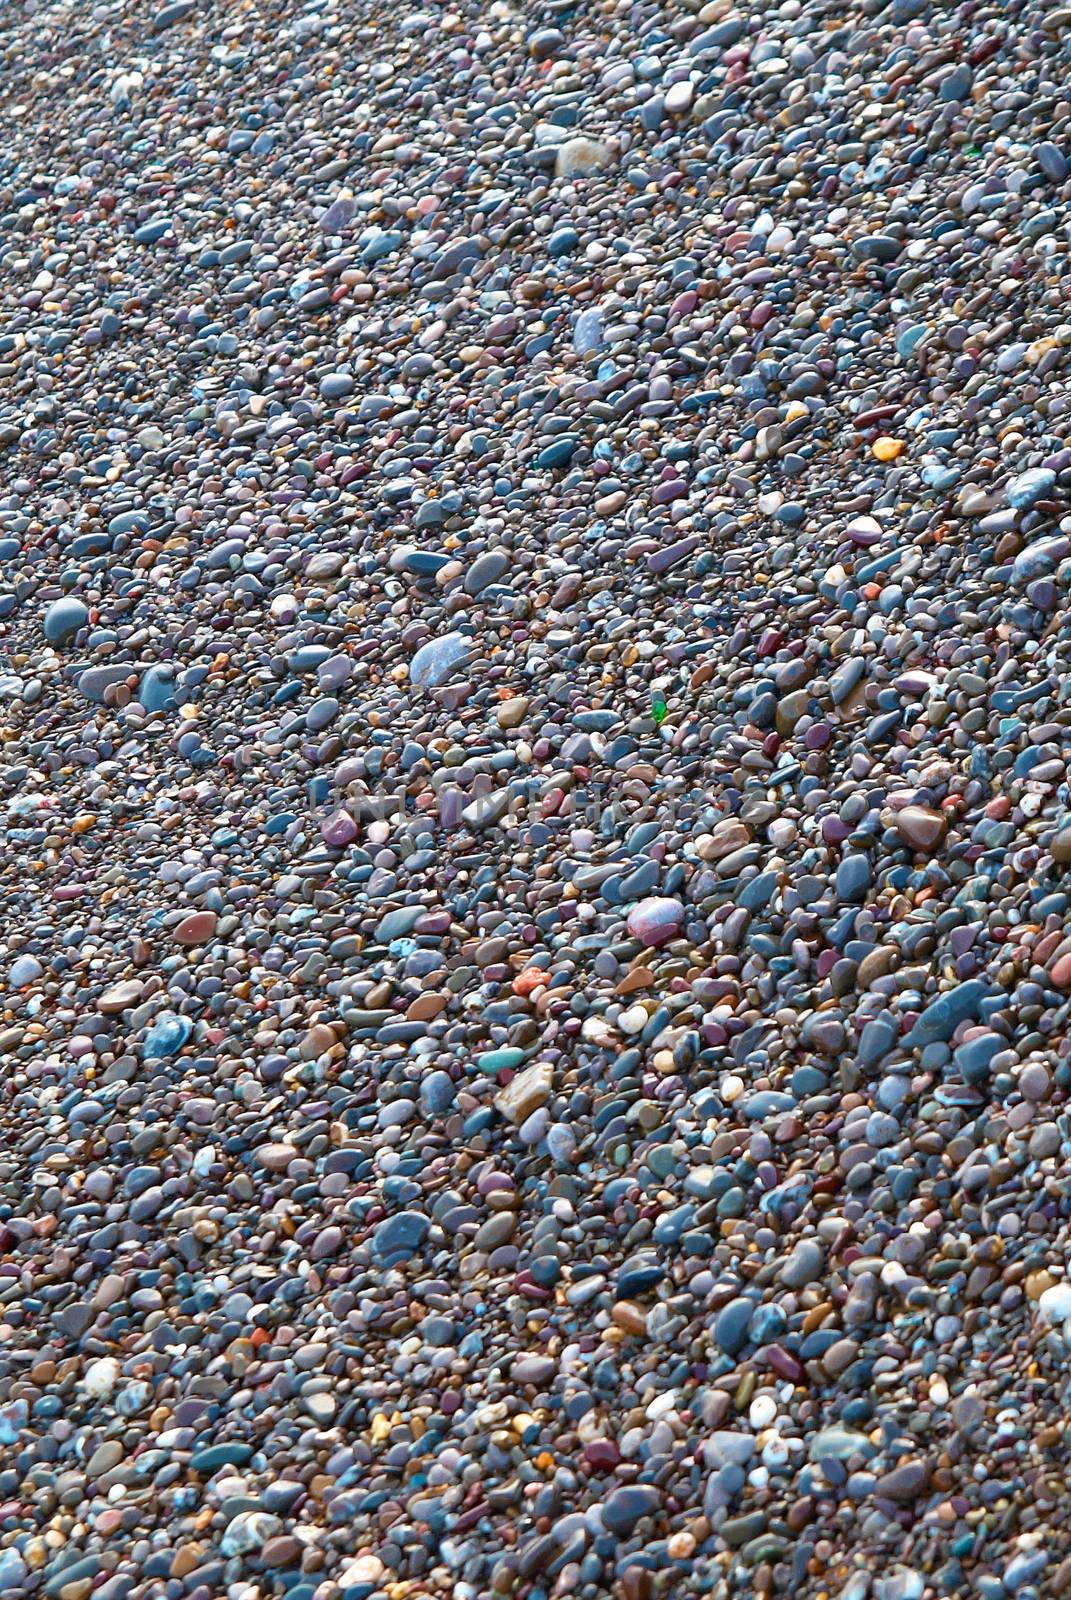 Textured pebble can be used for background.